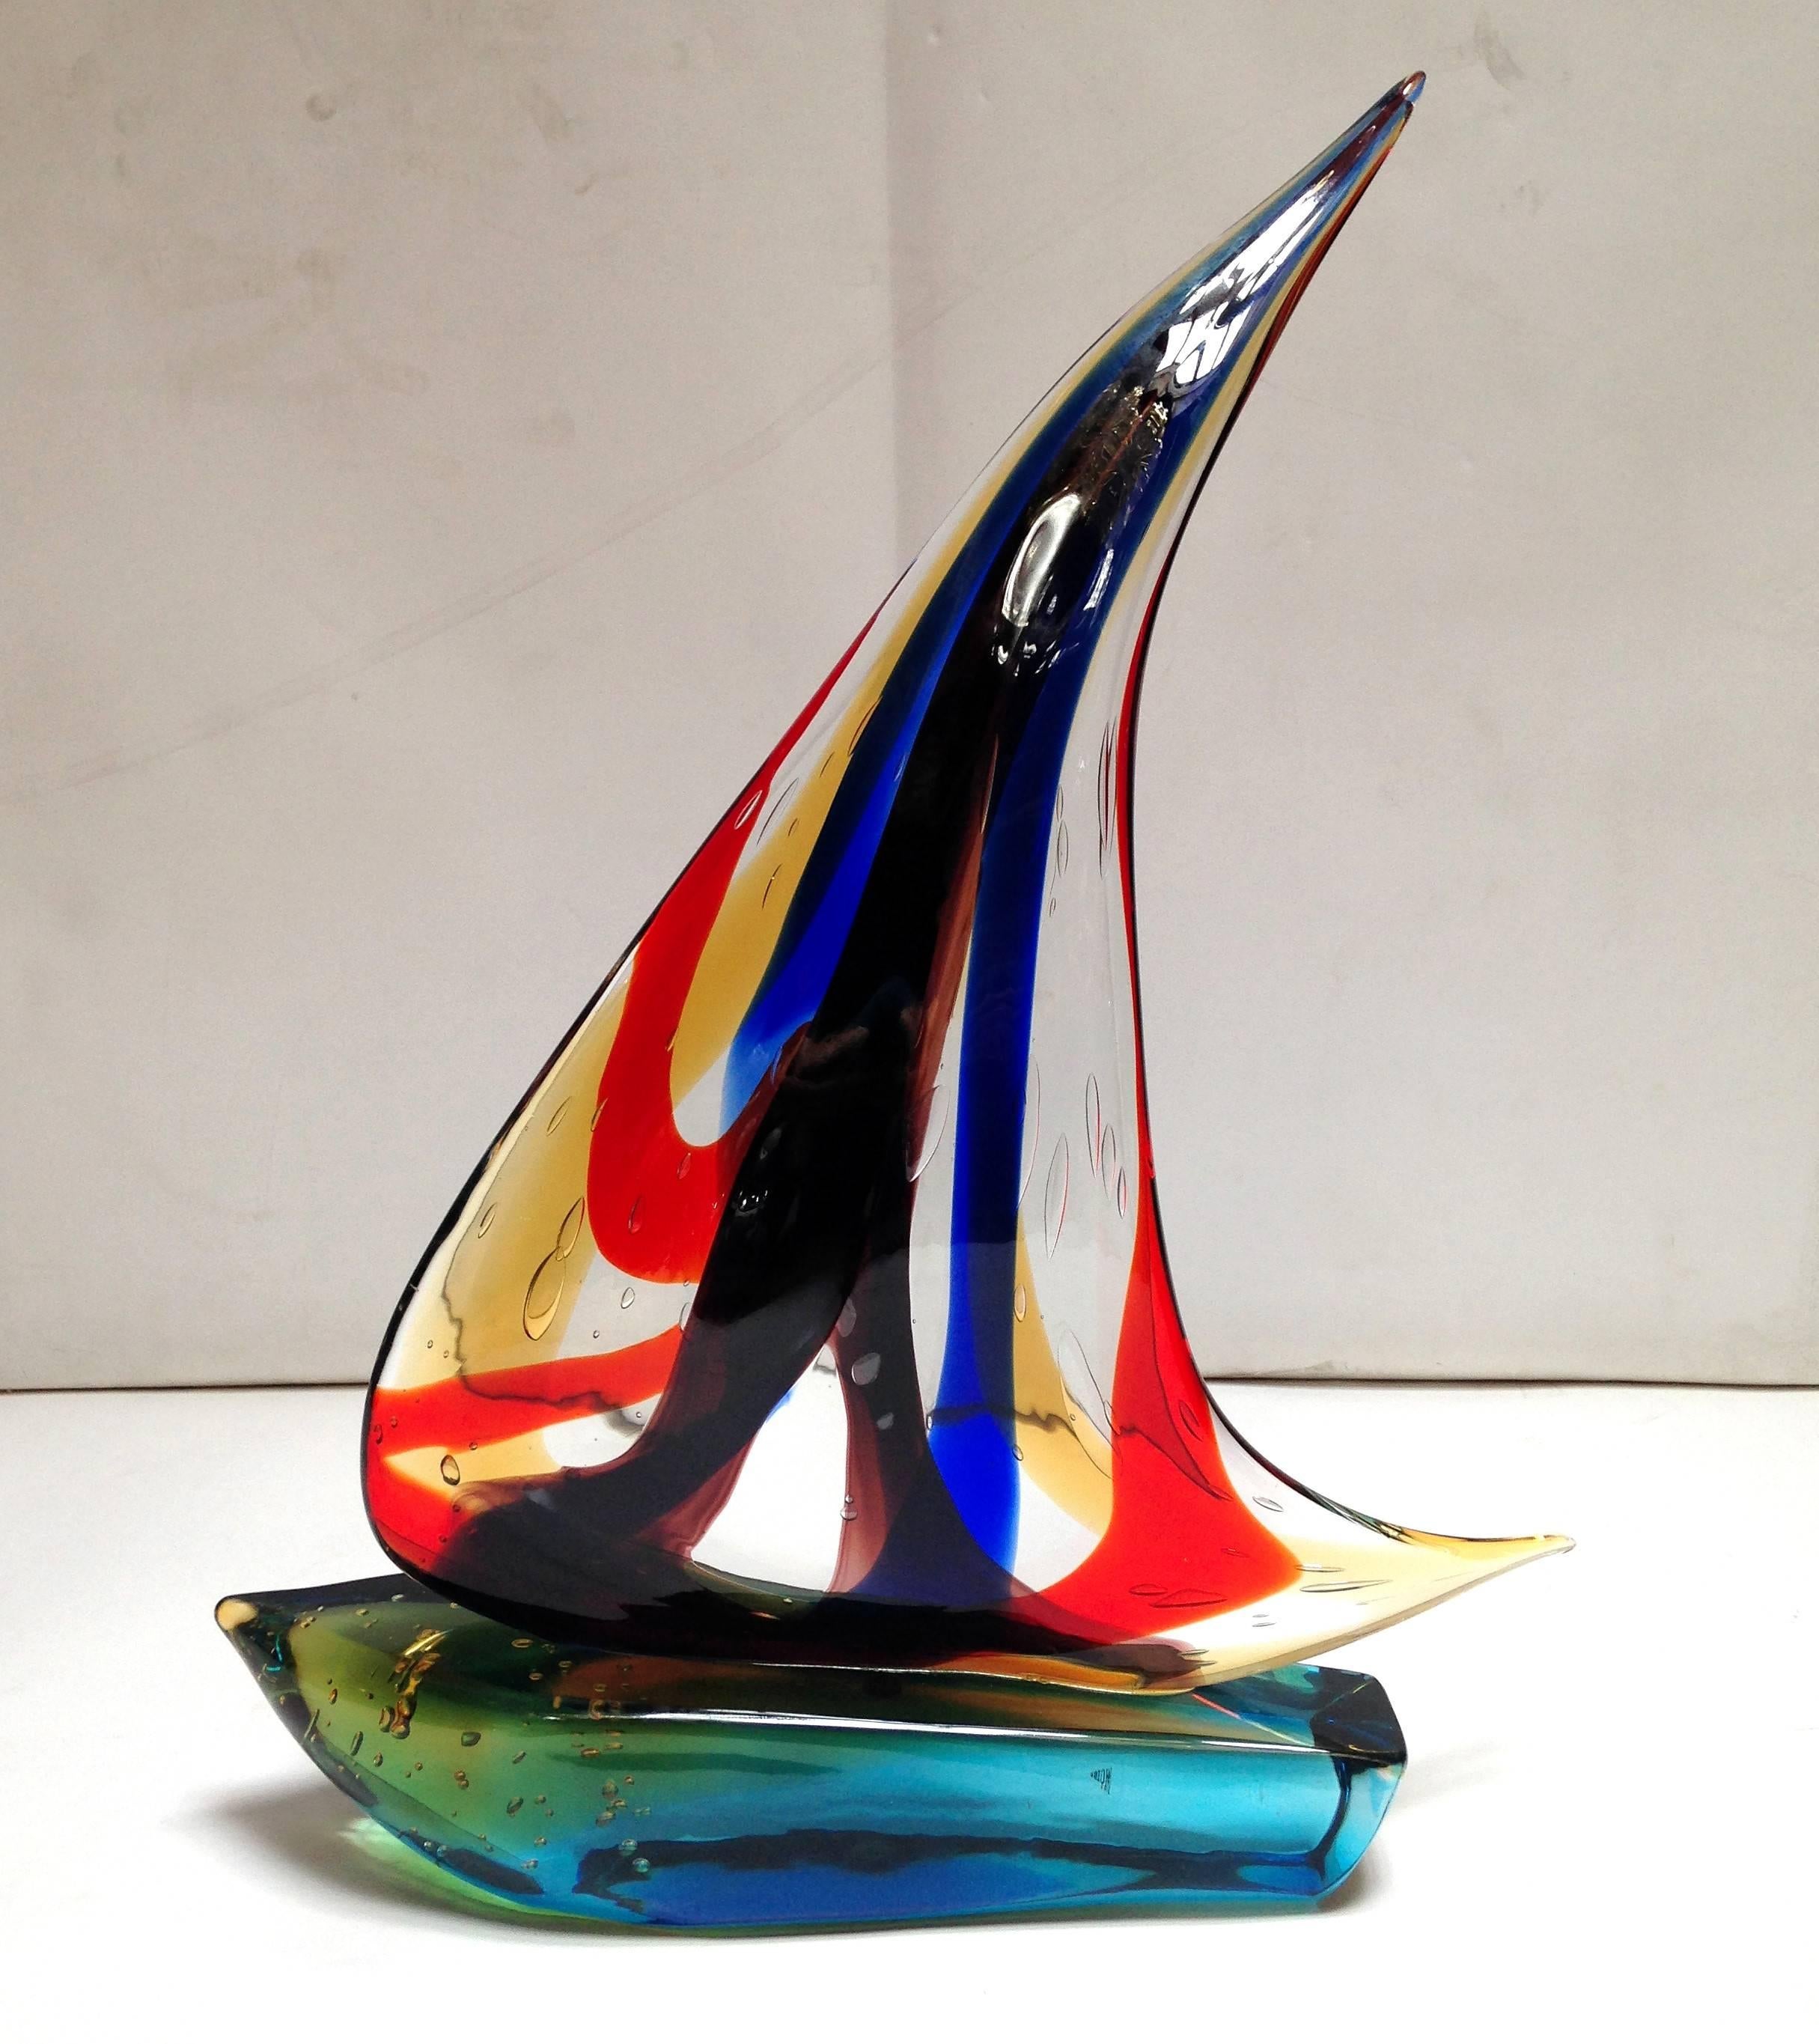 Vintage Italian single sail boat hand blown and crafted in multiple colored Murano glass by Sergio Constantini 
Signed on the base / Made in Italy in the 1960’s 
Height: 22 inches / Width: 14 inches / Depth: 4 inches 
1 in stock in Palm Springs